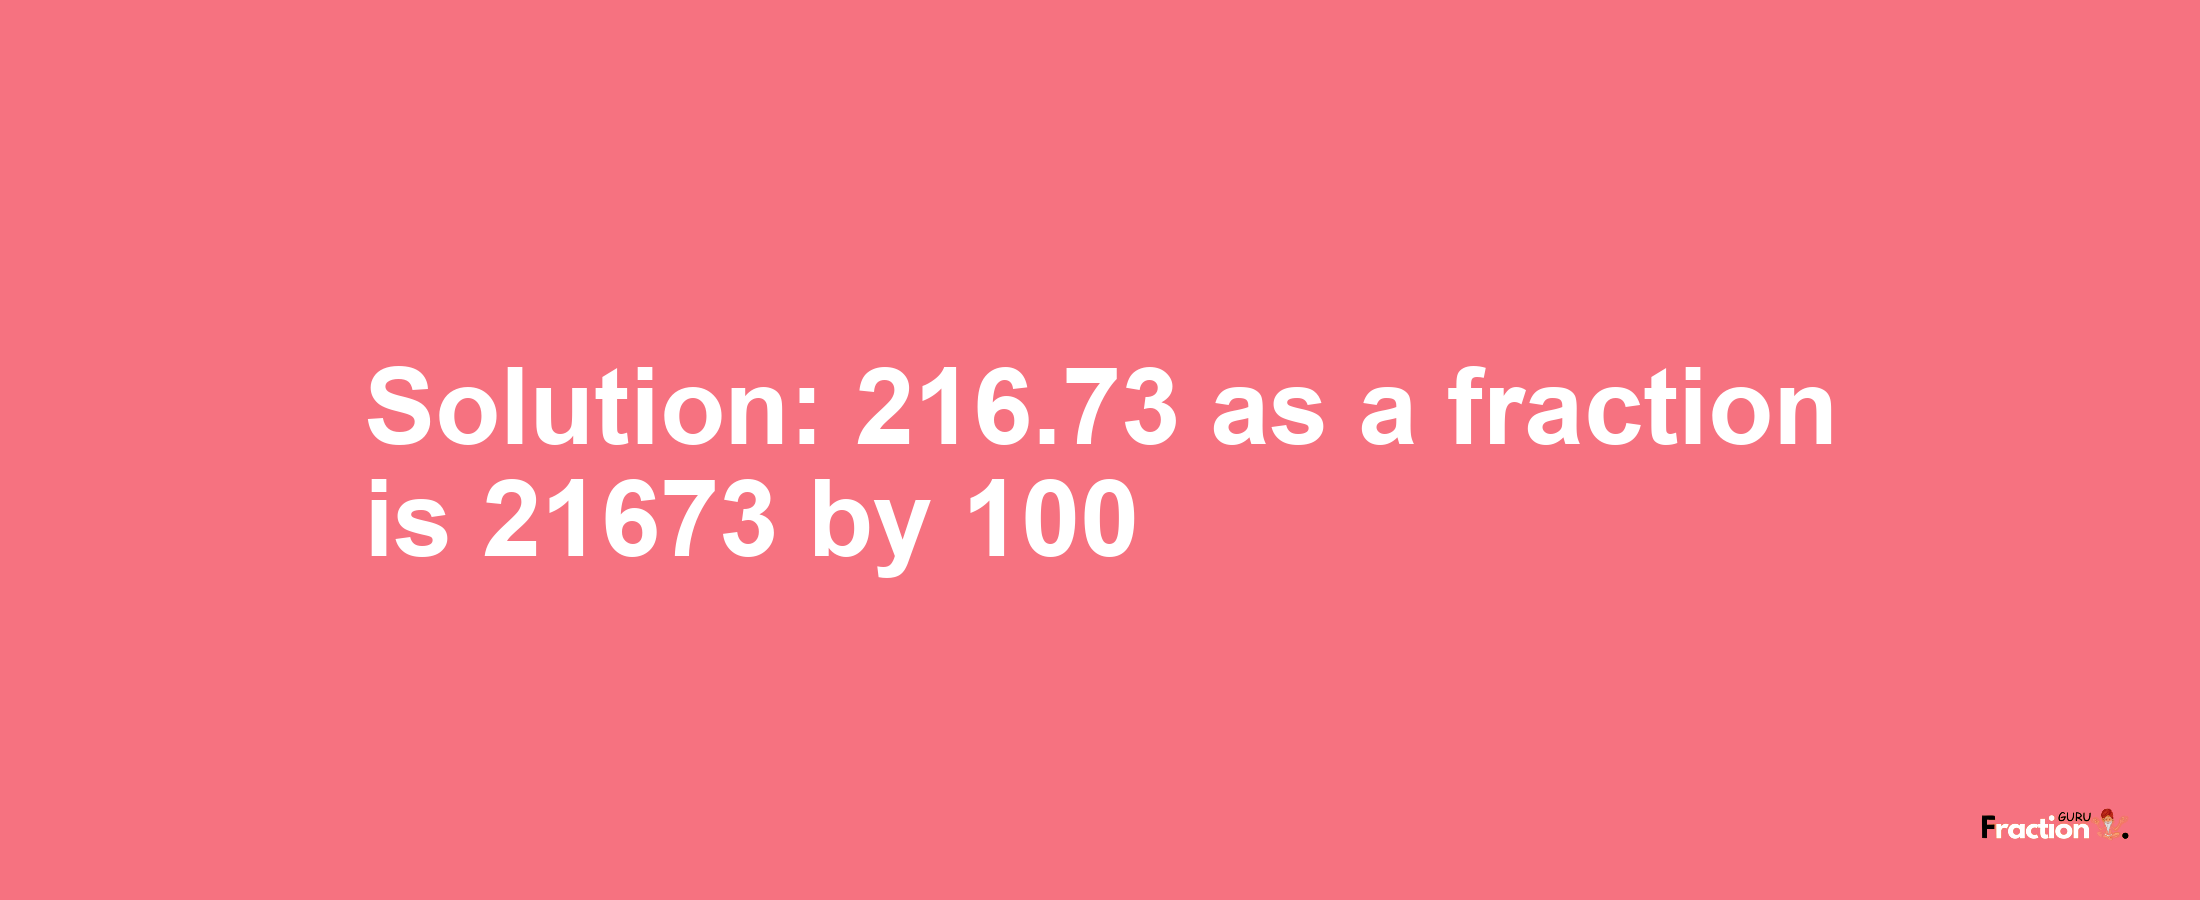 Solution:216.73 as a fraction is 21673/100